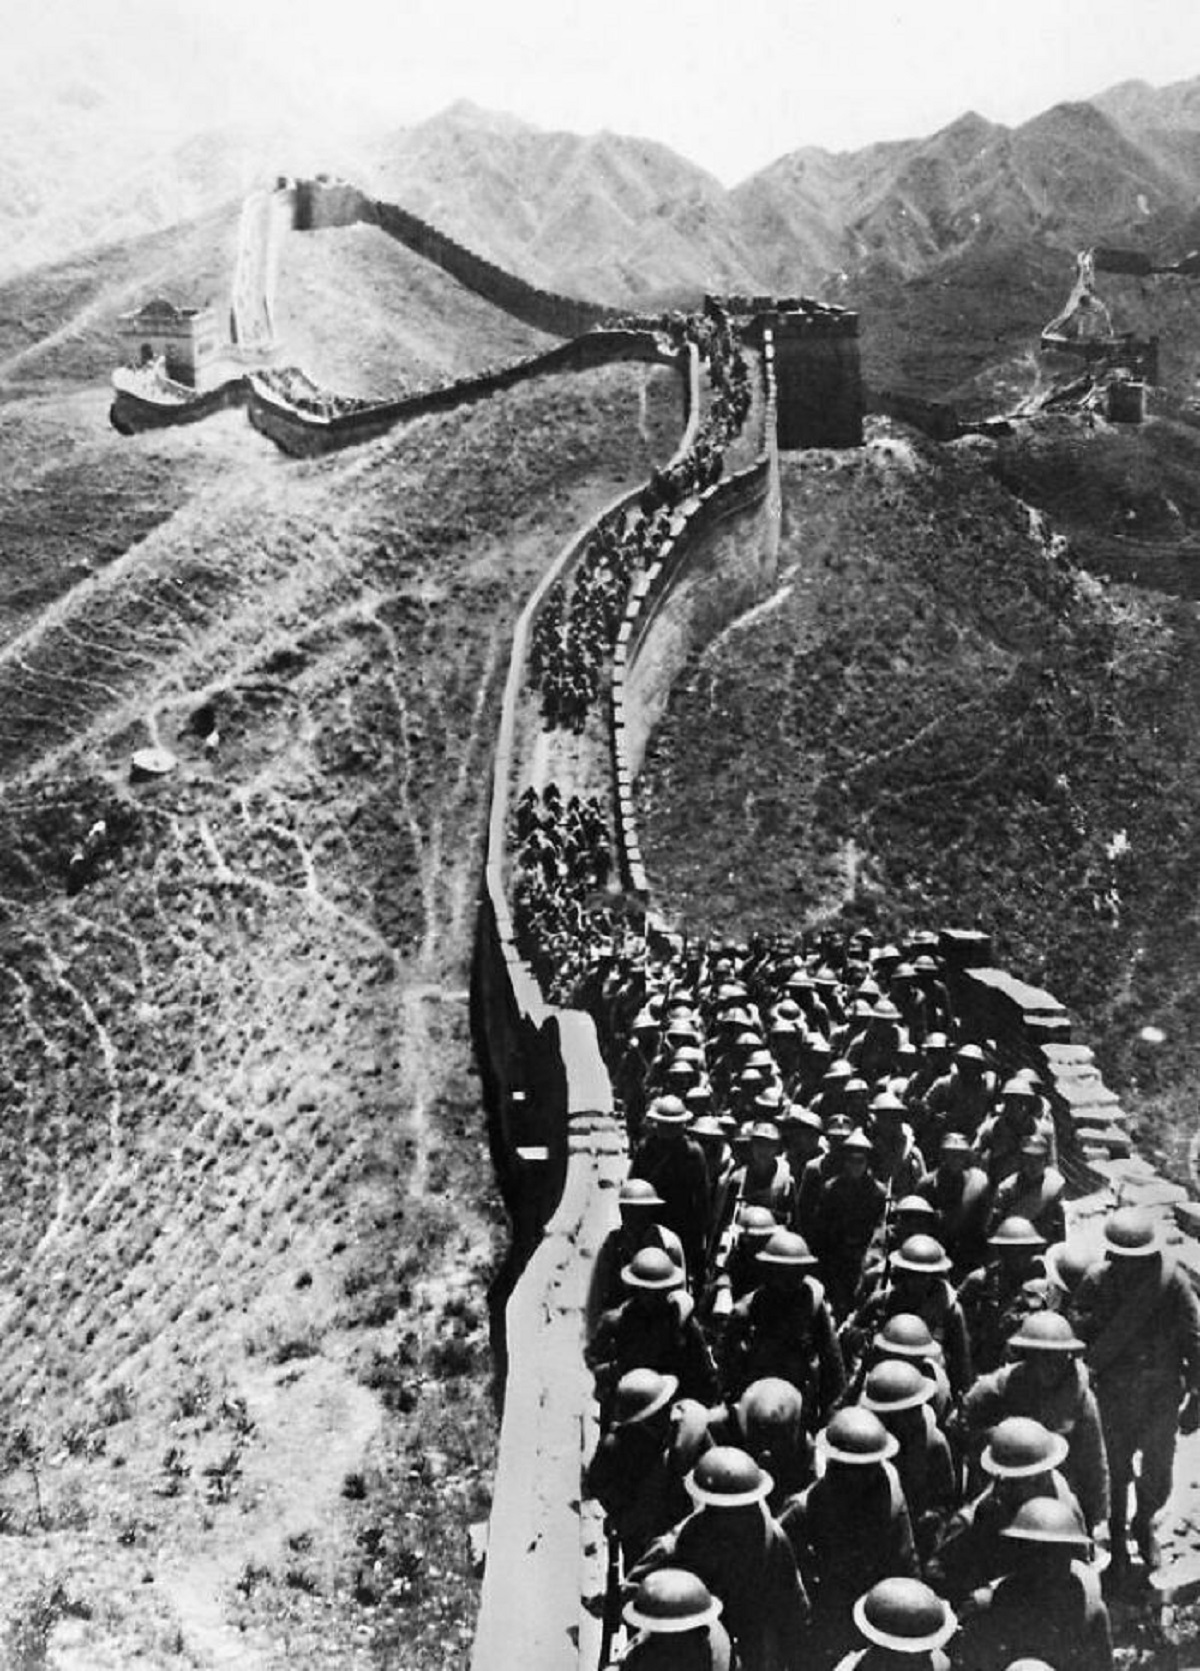 Chinese soldiers advancing via the Great Wall of China in October 1937